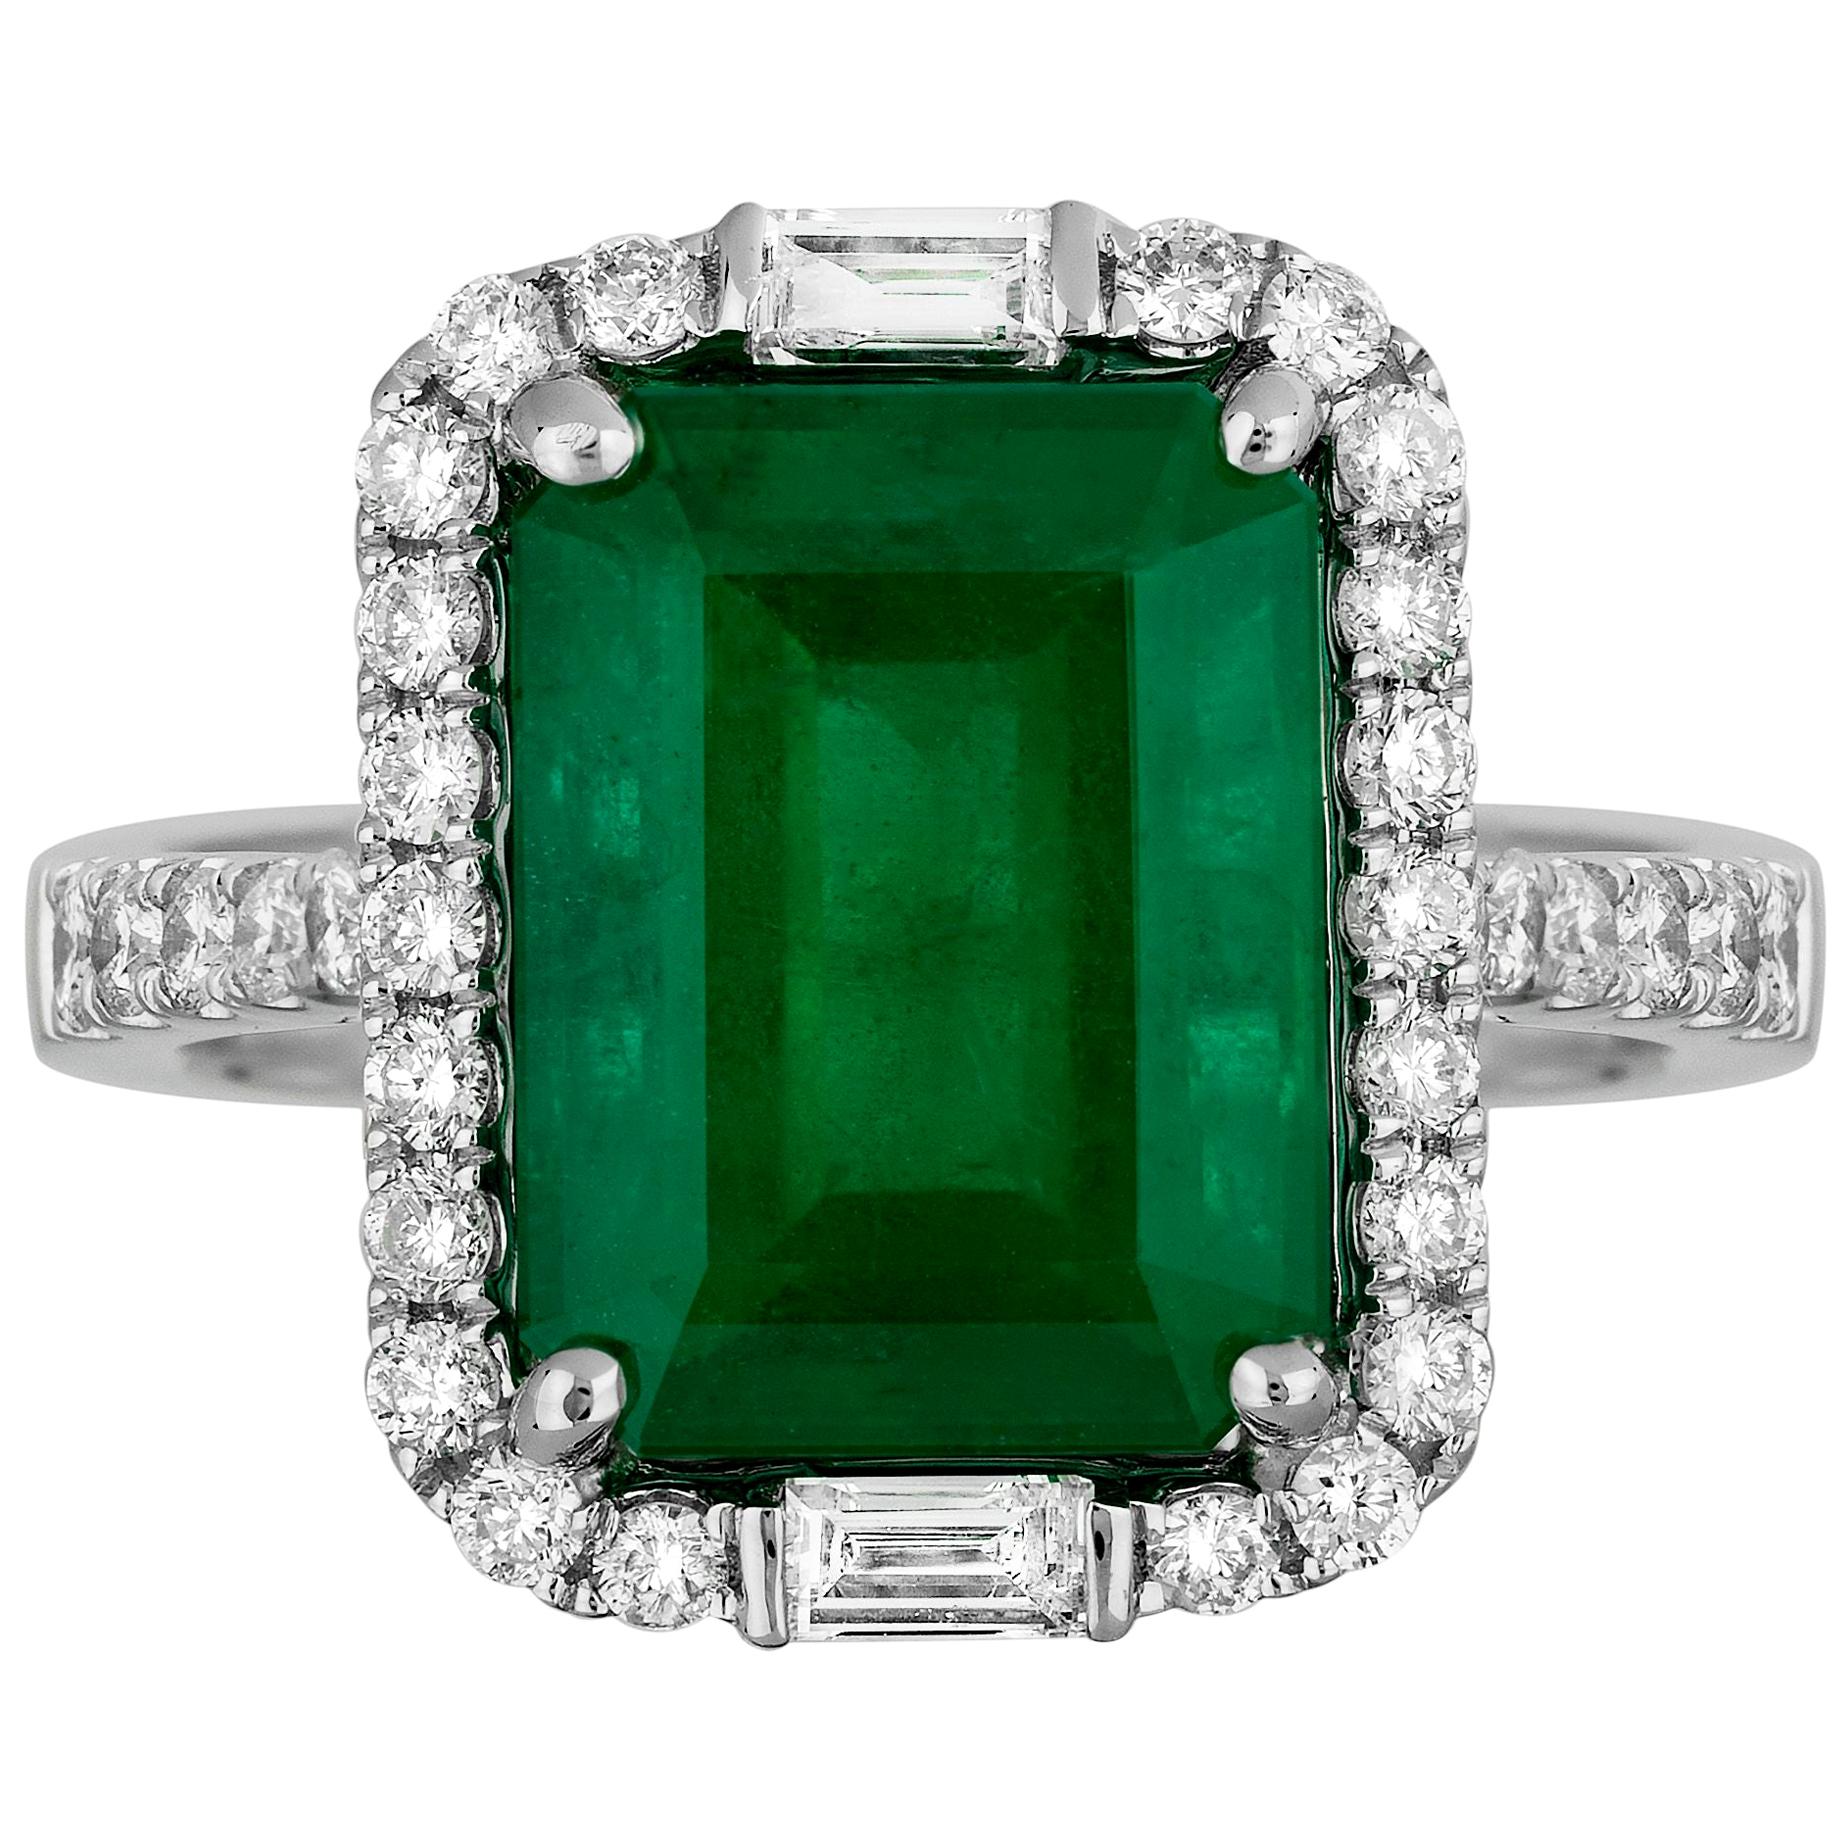 4.72 Carat Emerald Diamond Cocktail Ring For Sale